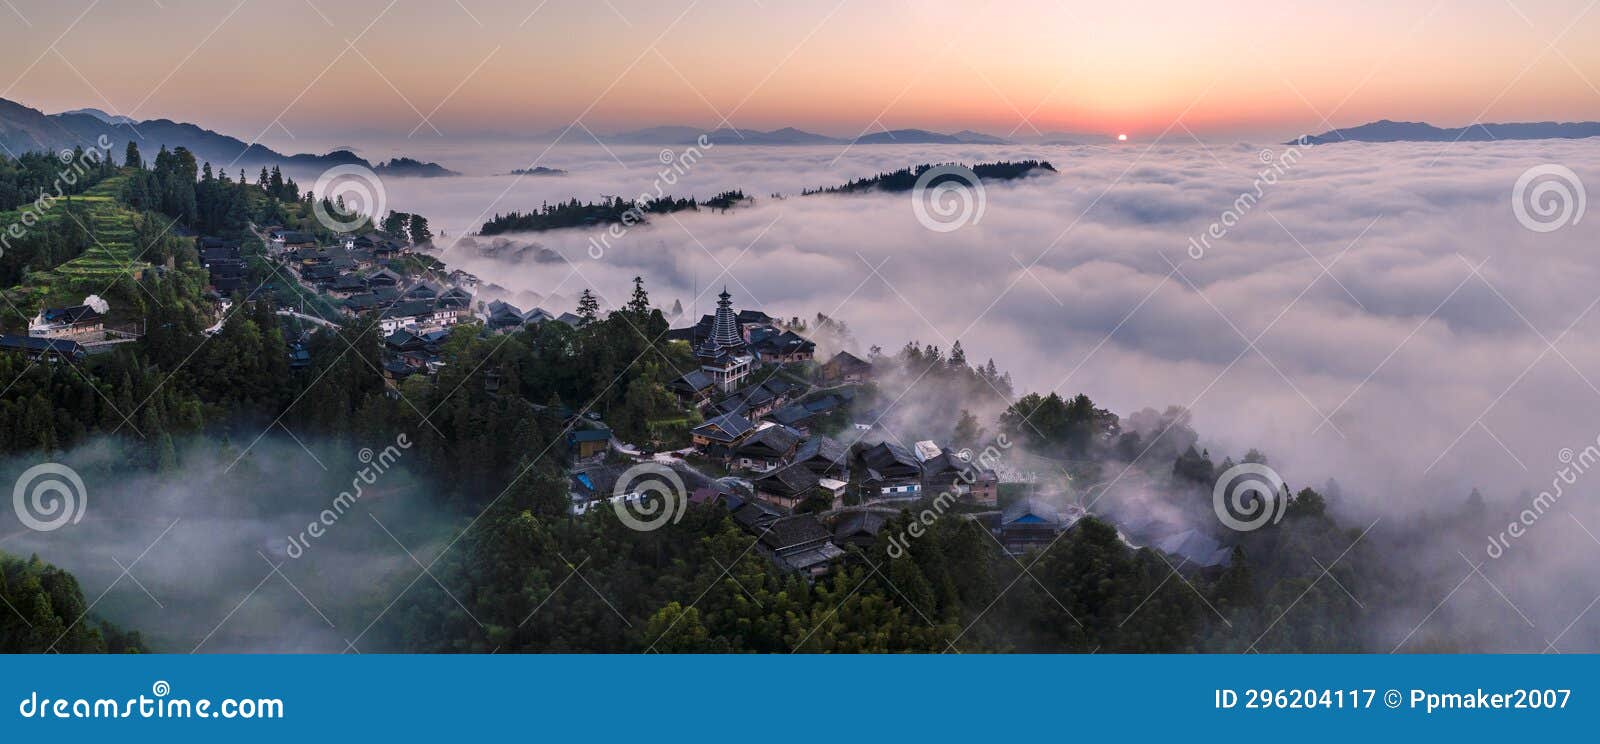 the sea of clouds in dong villages at sunrise